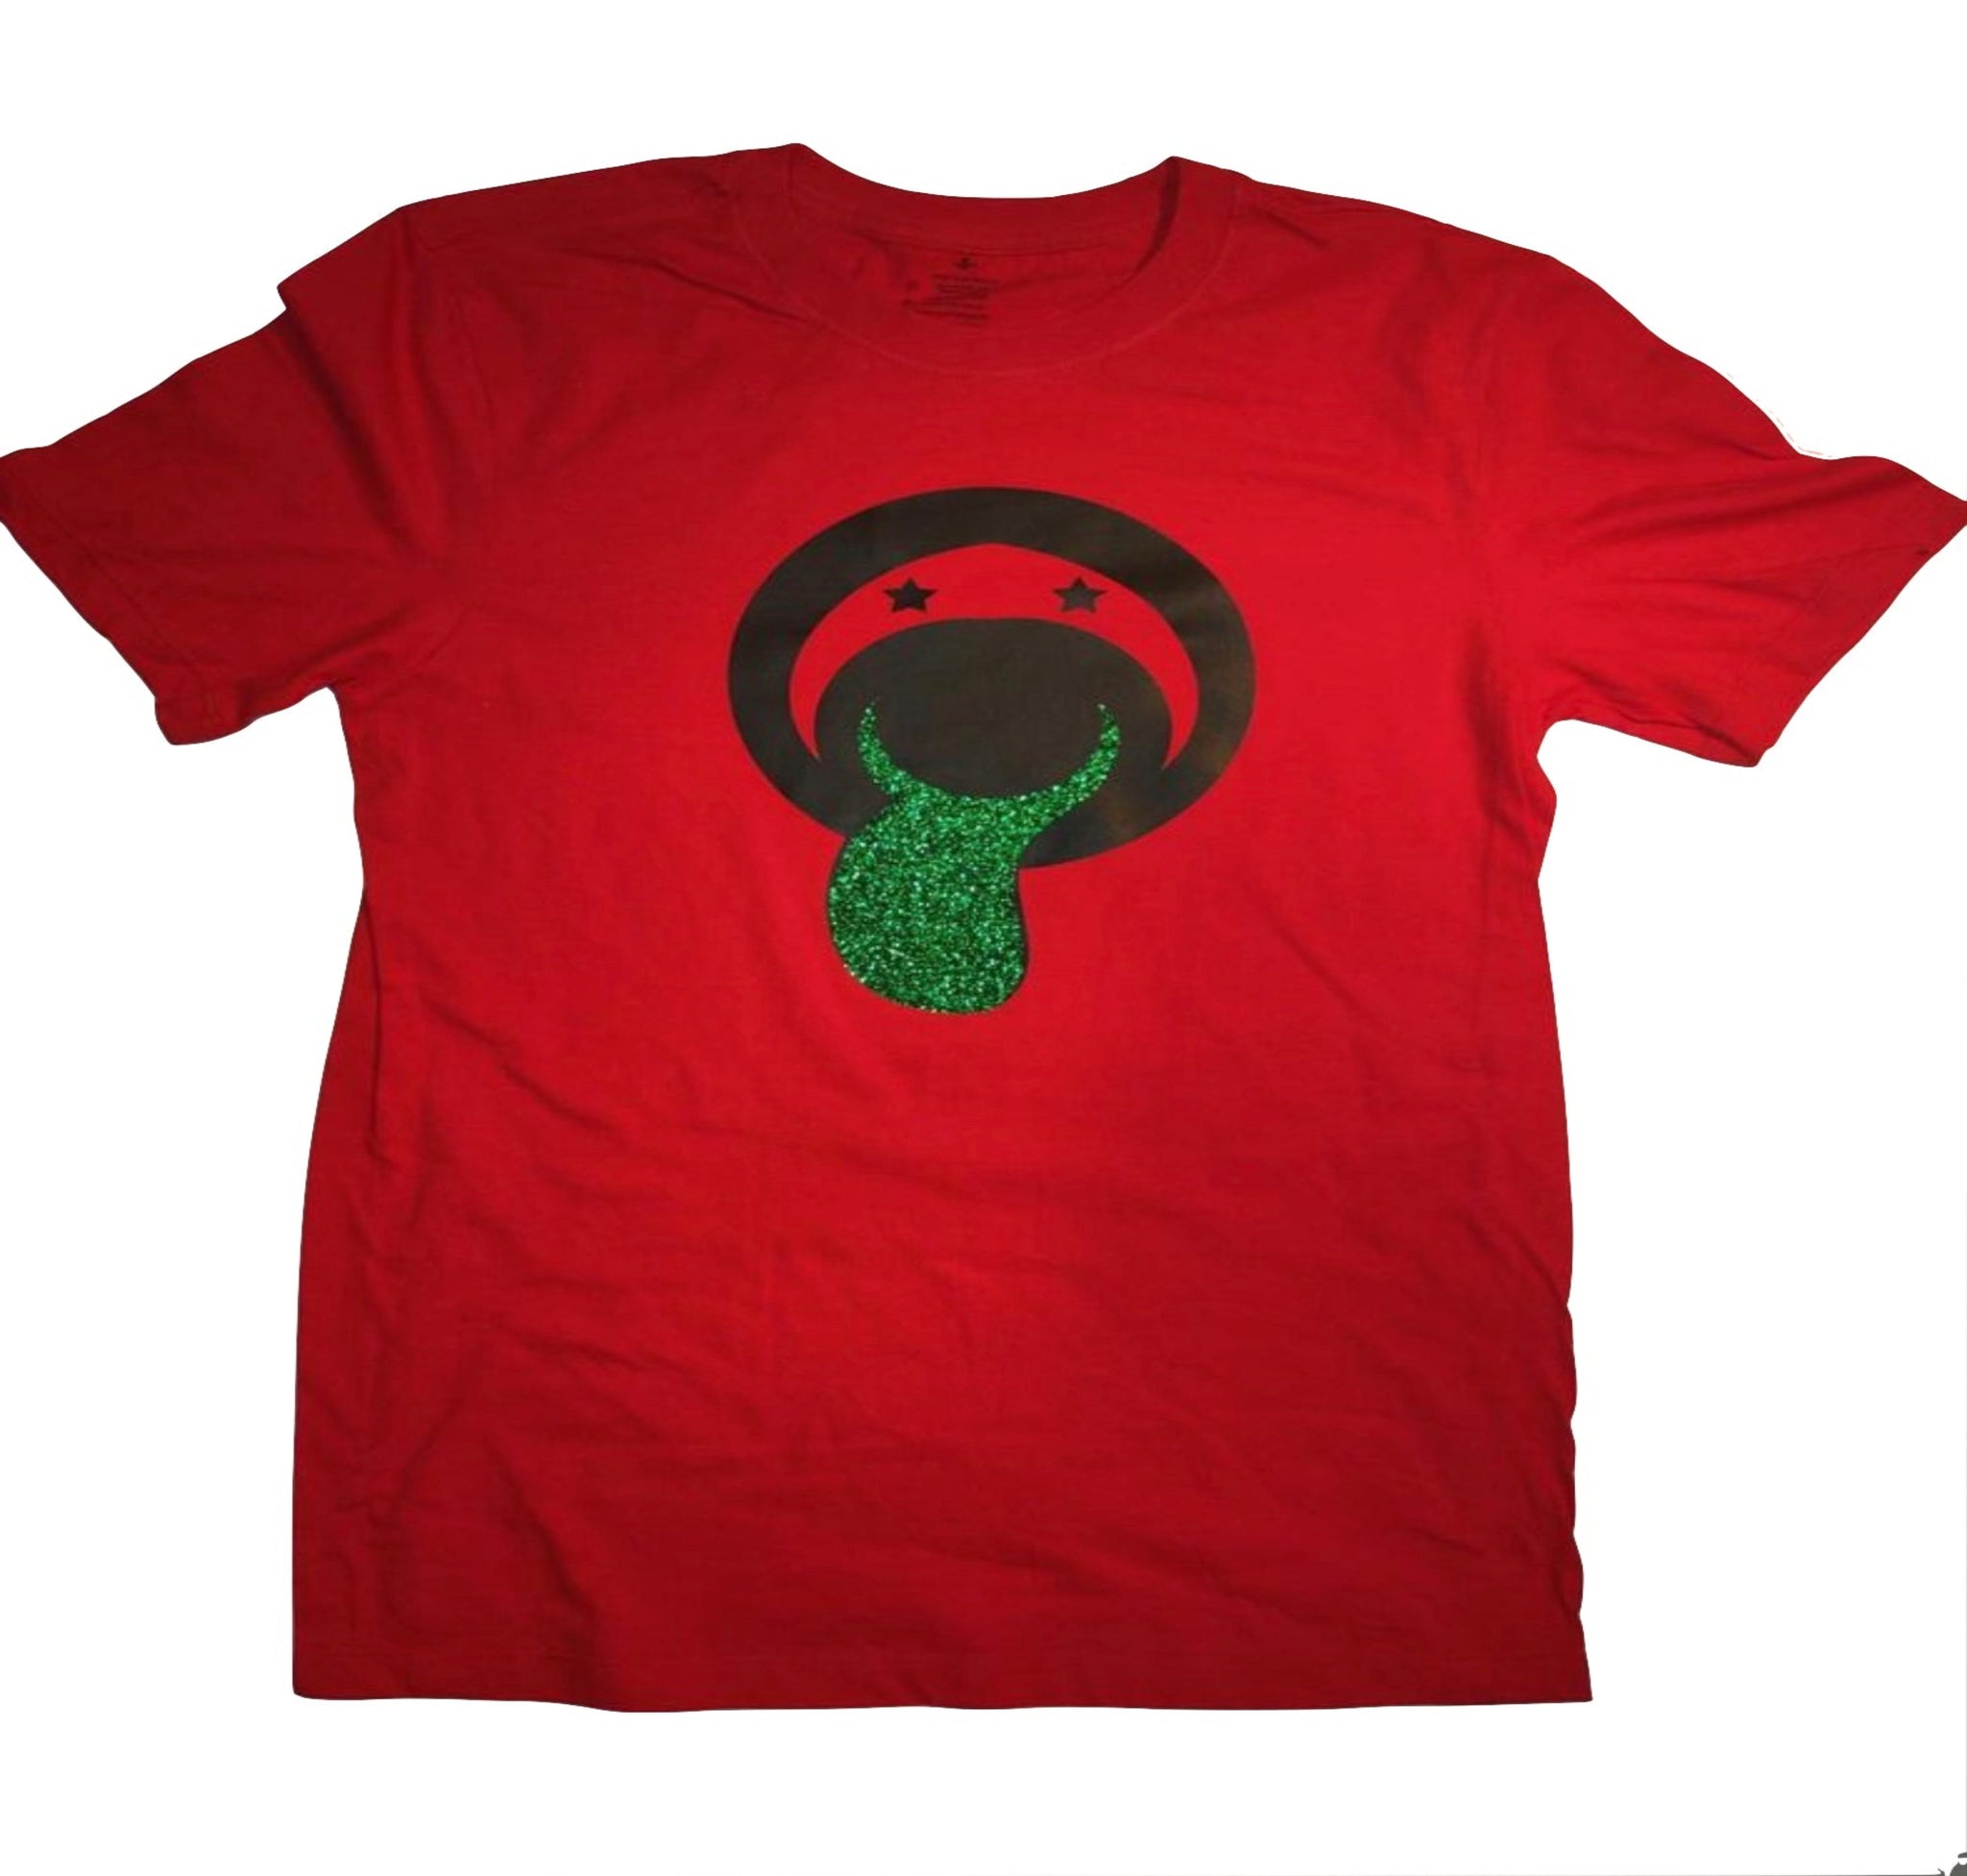 New Bucaleany "Toungeleany Green " Tshirt